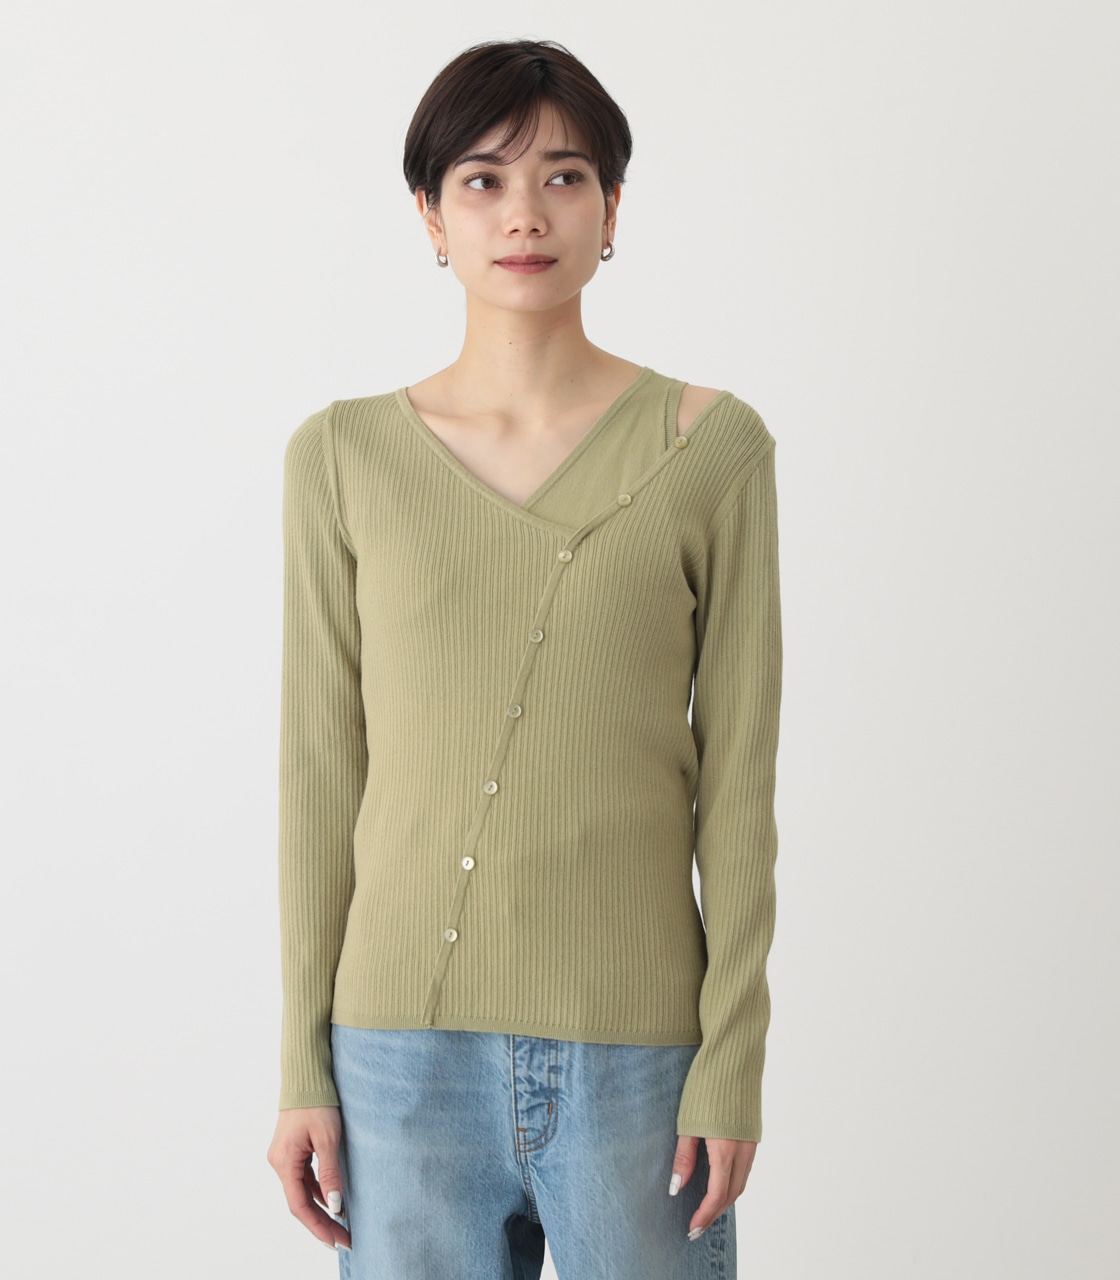 FAKE LAYERED BUTTON KNIT TOPS/フェイクレイヤードボタンニットトップス 詳細画像 LIME 5